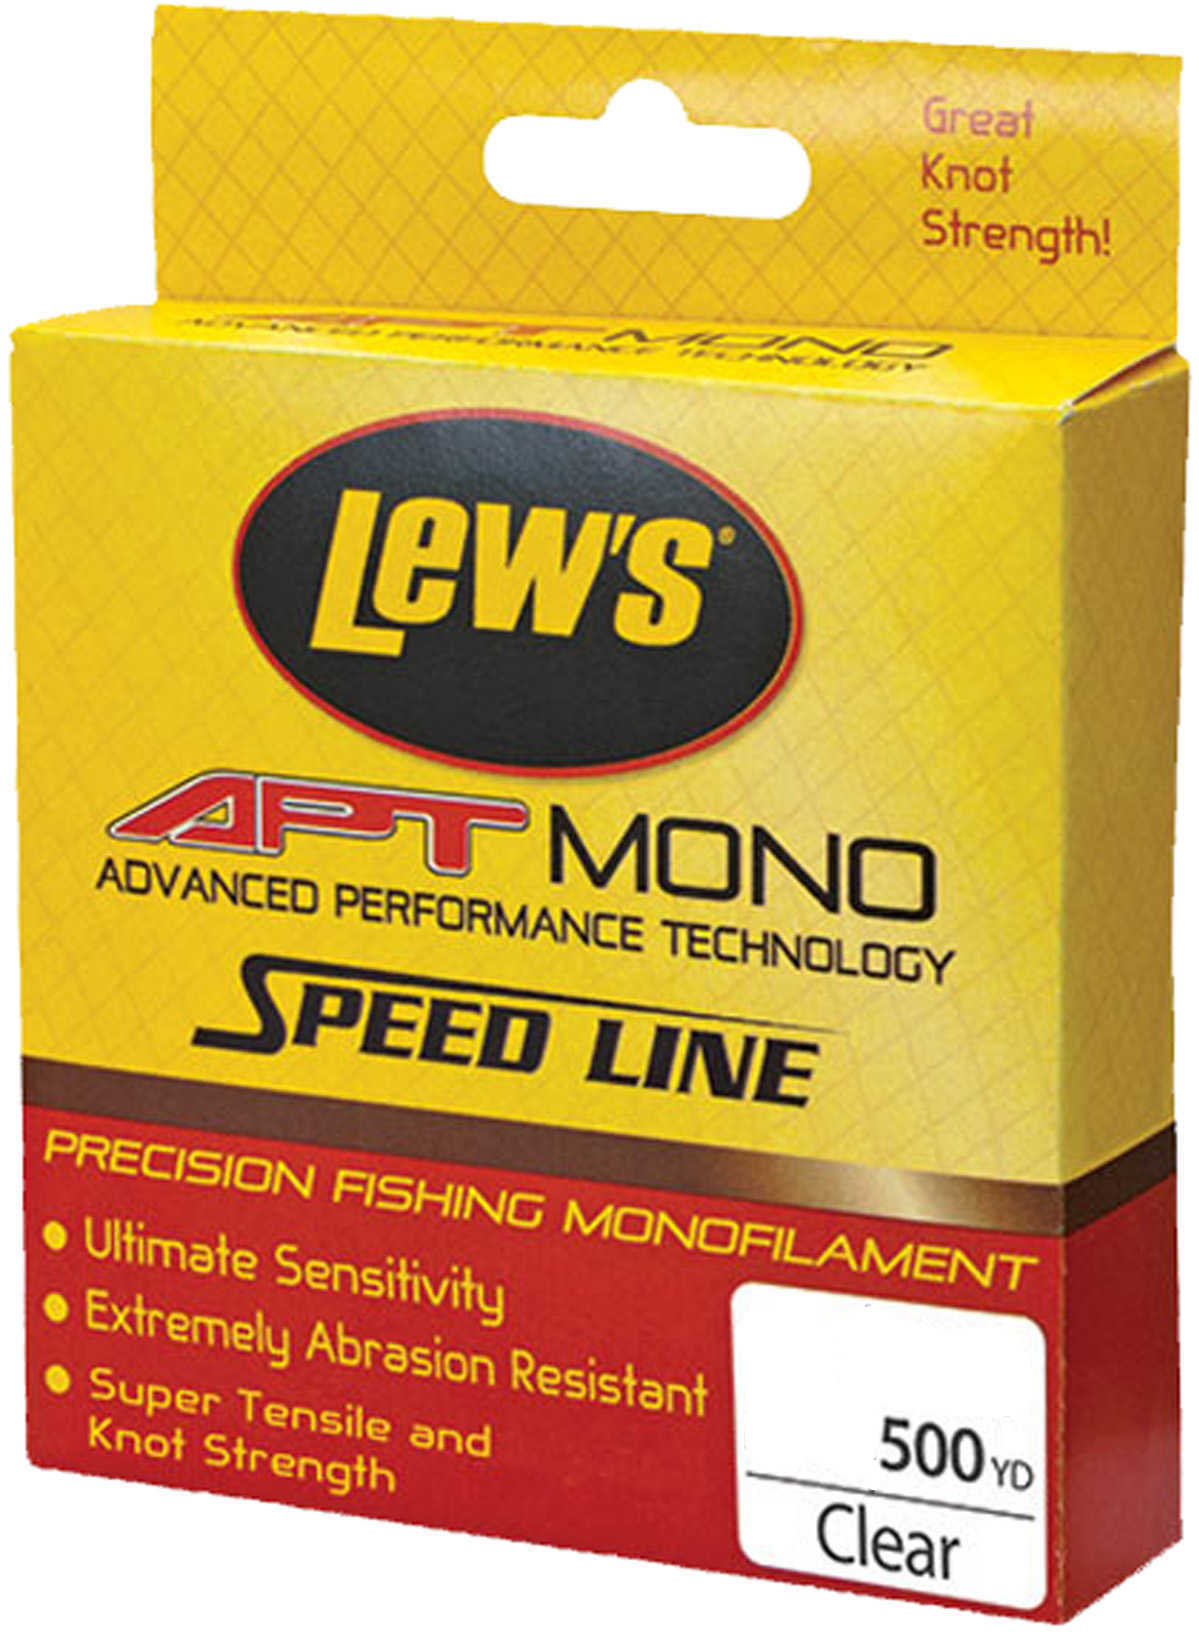 Lews APT Monofilament Speed Line 10 lbs 500 Yards Clear Md: LAPTM10CL